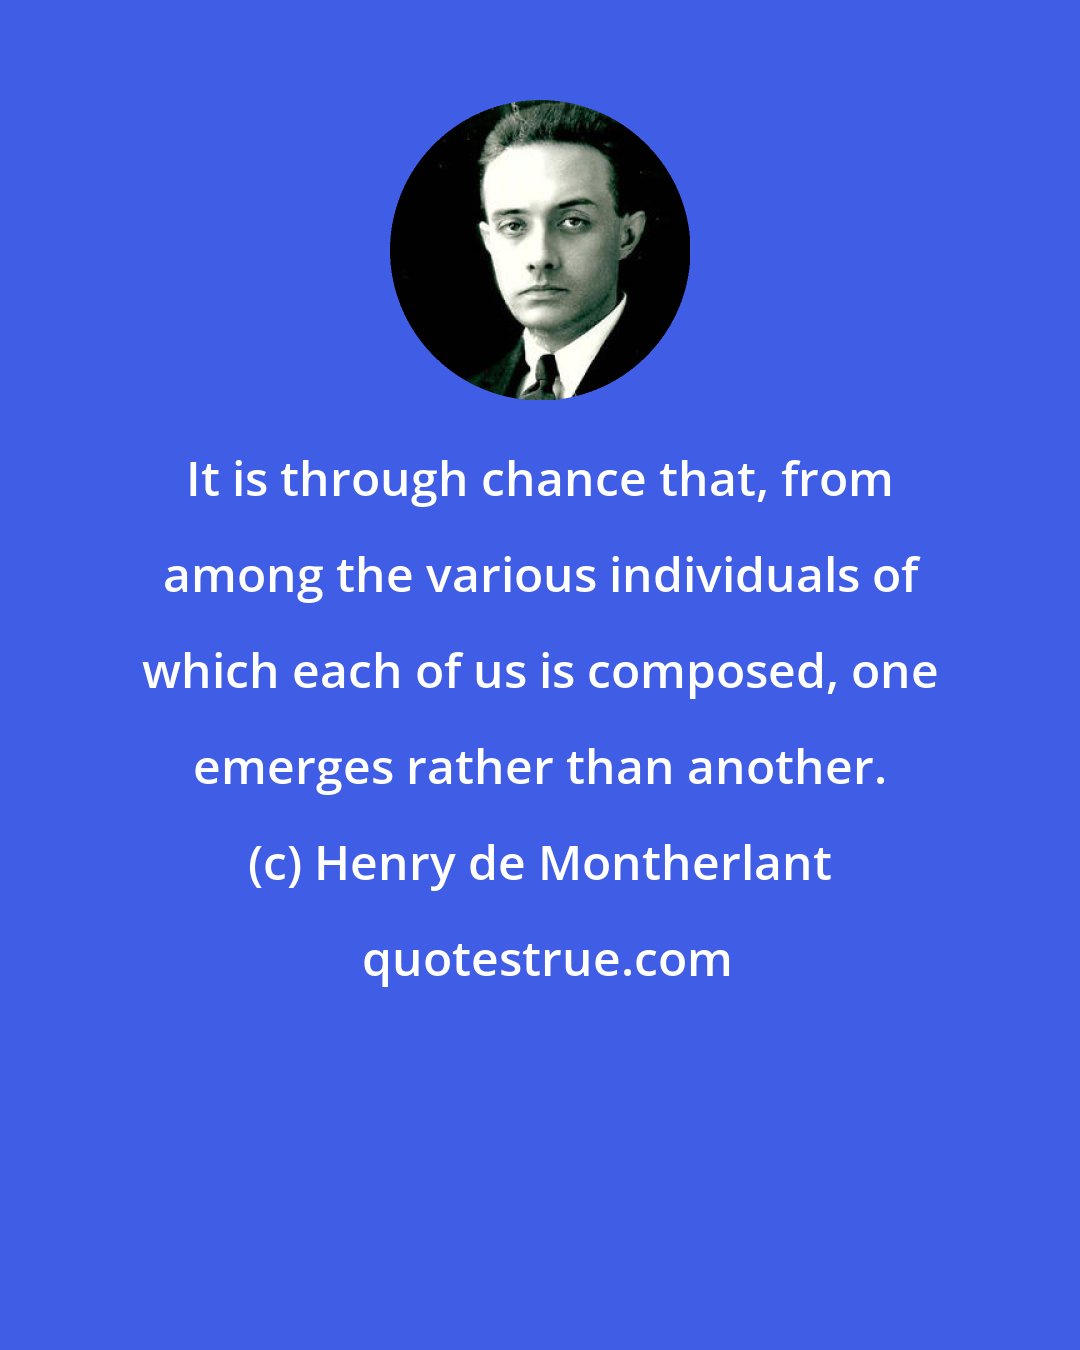 Henry de Montherlant: It is through chance that, from among the various individuals of which each of us is composed, one emerges rather than another.